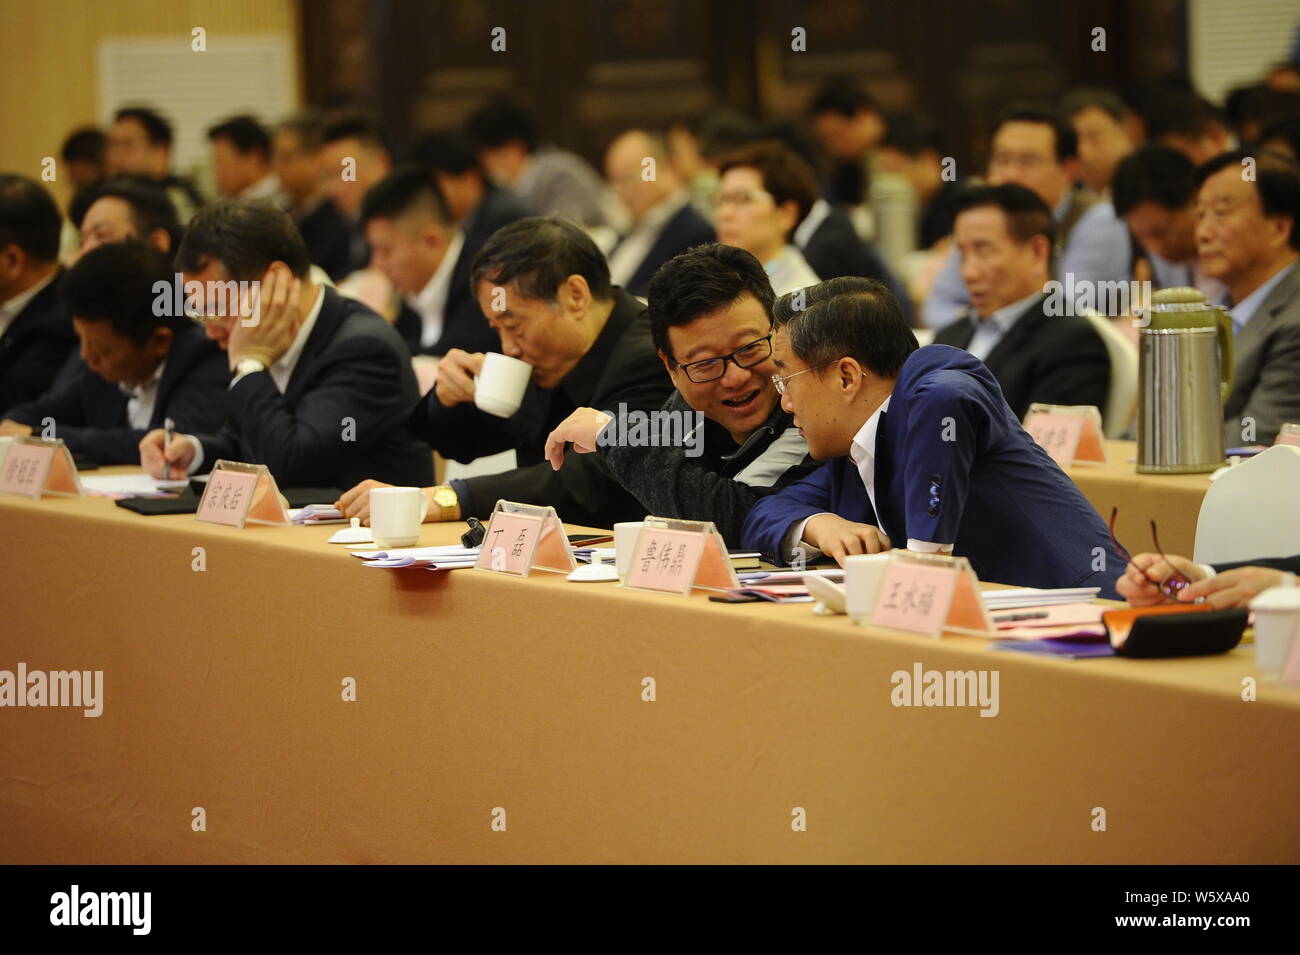 William Ding or Ding Lei, left, CEO of Netease (163.com), talks with Lu Weiding, Chief Executive Officer and President of Wanxiang Group, during the H Stock Photo